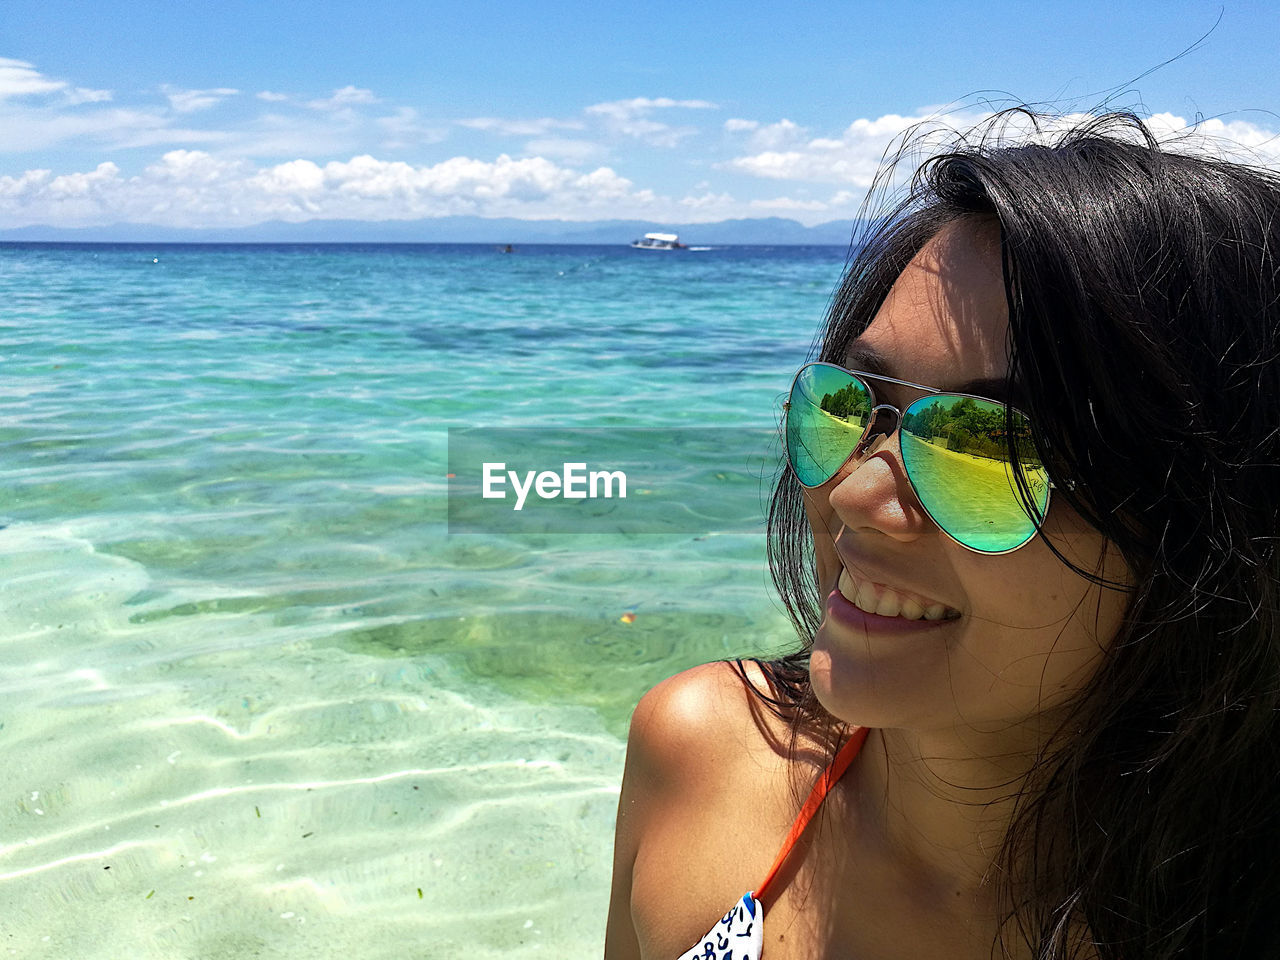 PORTRAIT OF YOUNG WOMAN IN SUNGLASSES AT BEACH